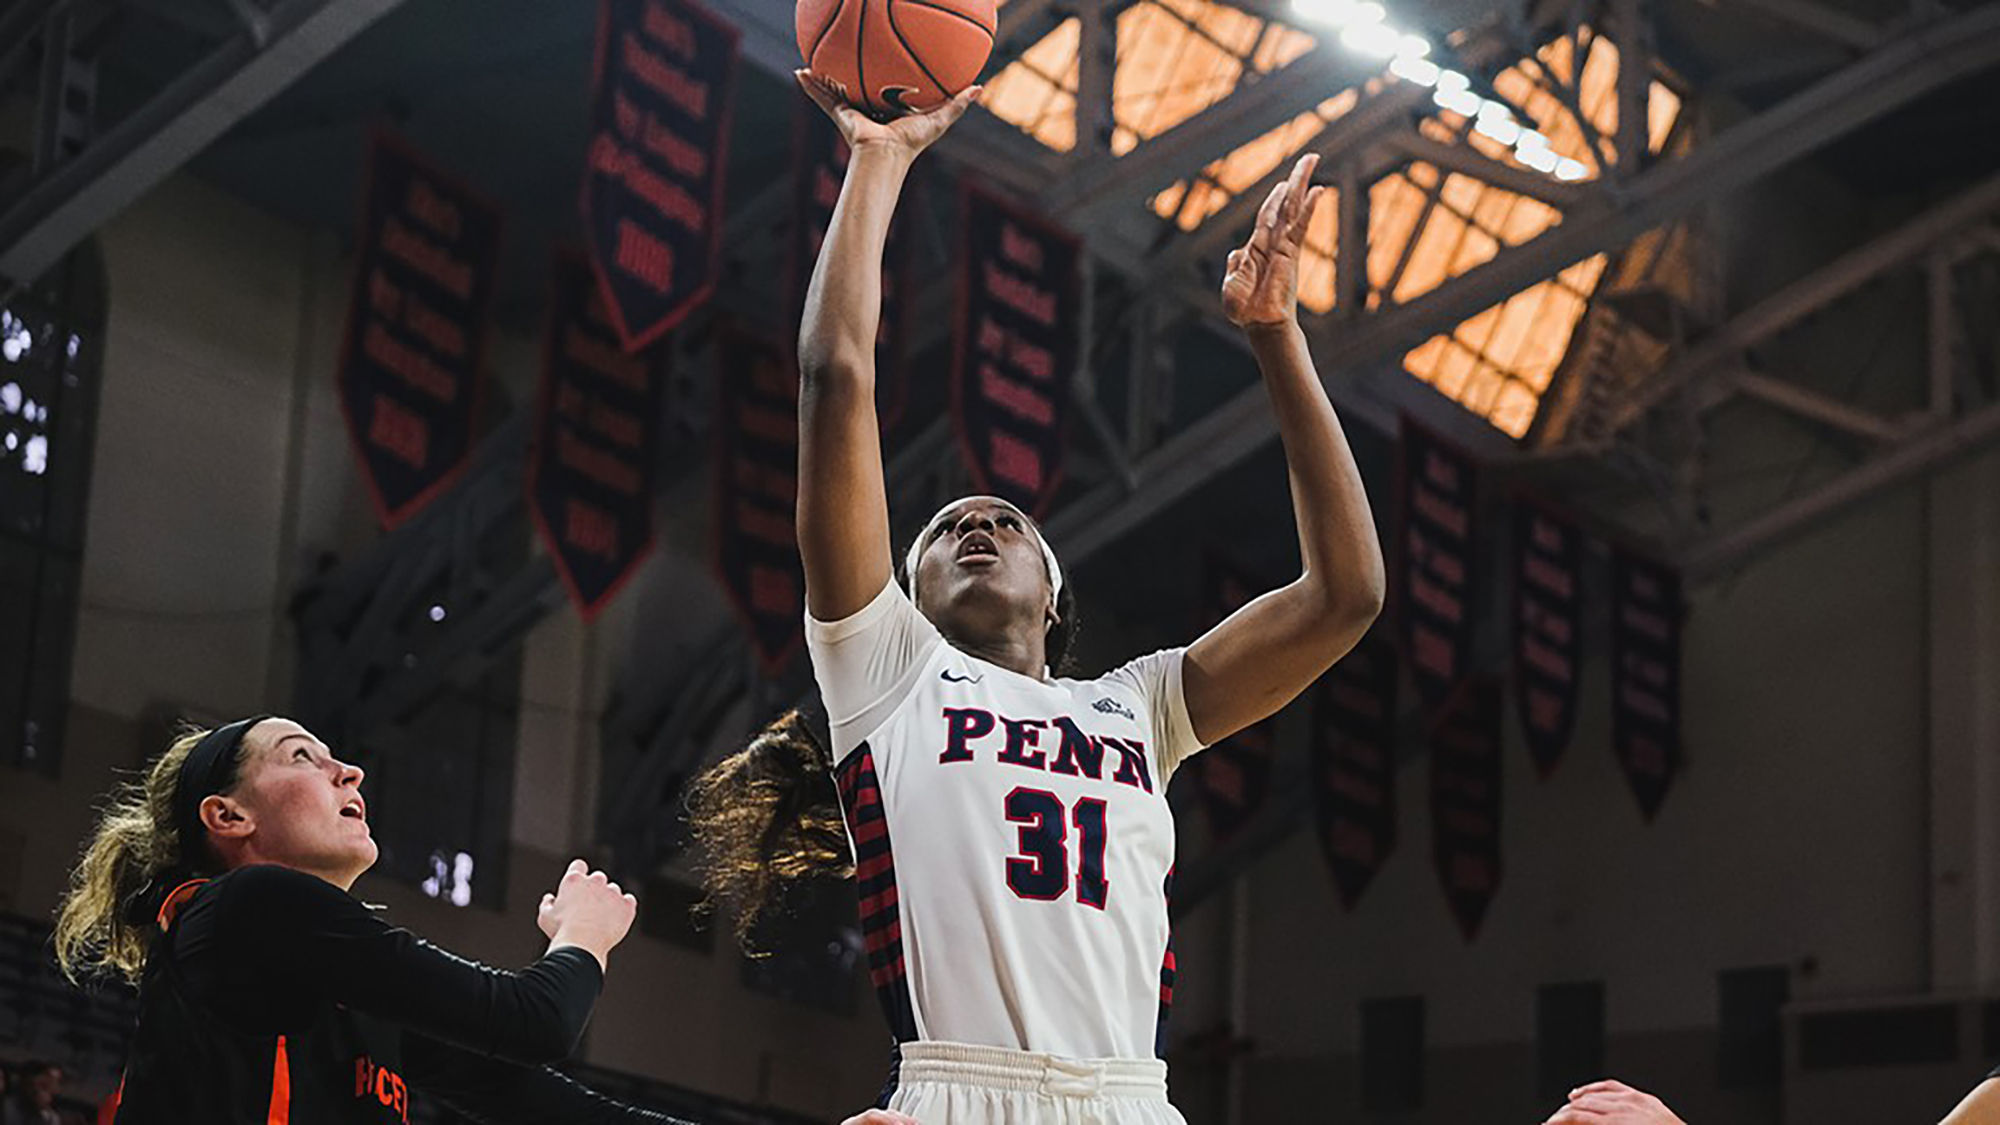 Eleah Parker goes up for the lay in against Princeton at the Palestra.